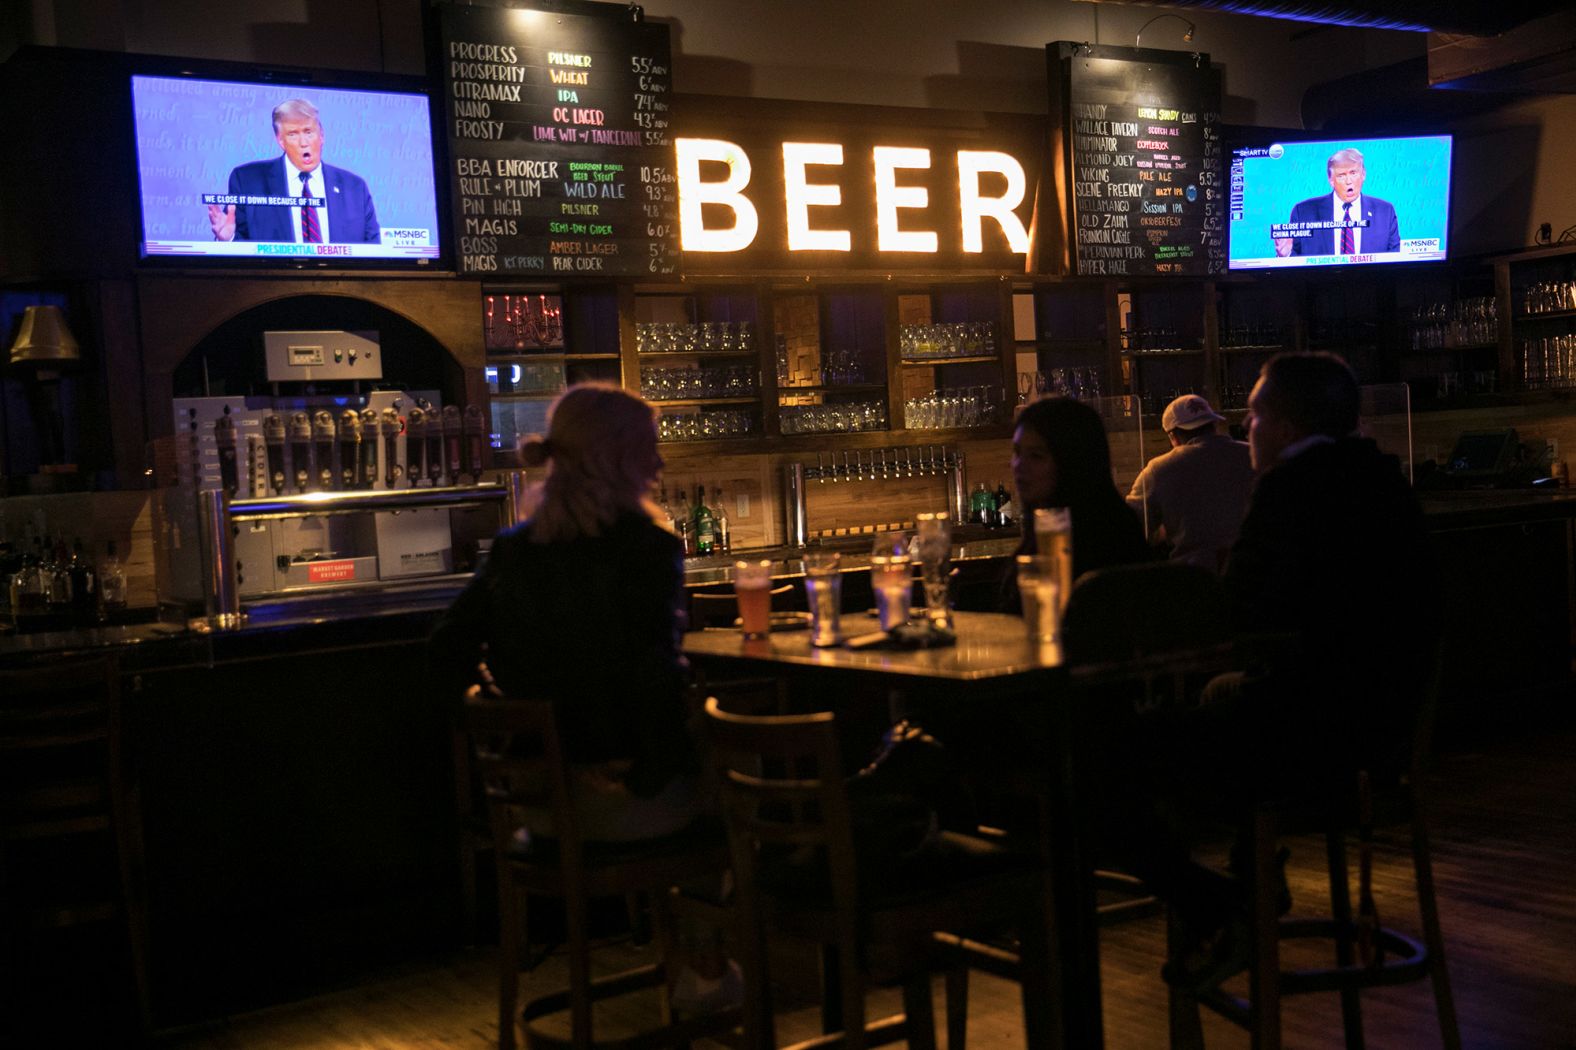 People watch the debate from the Market Garden Brewery in Cleveland.